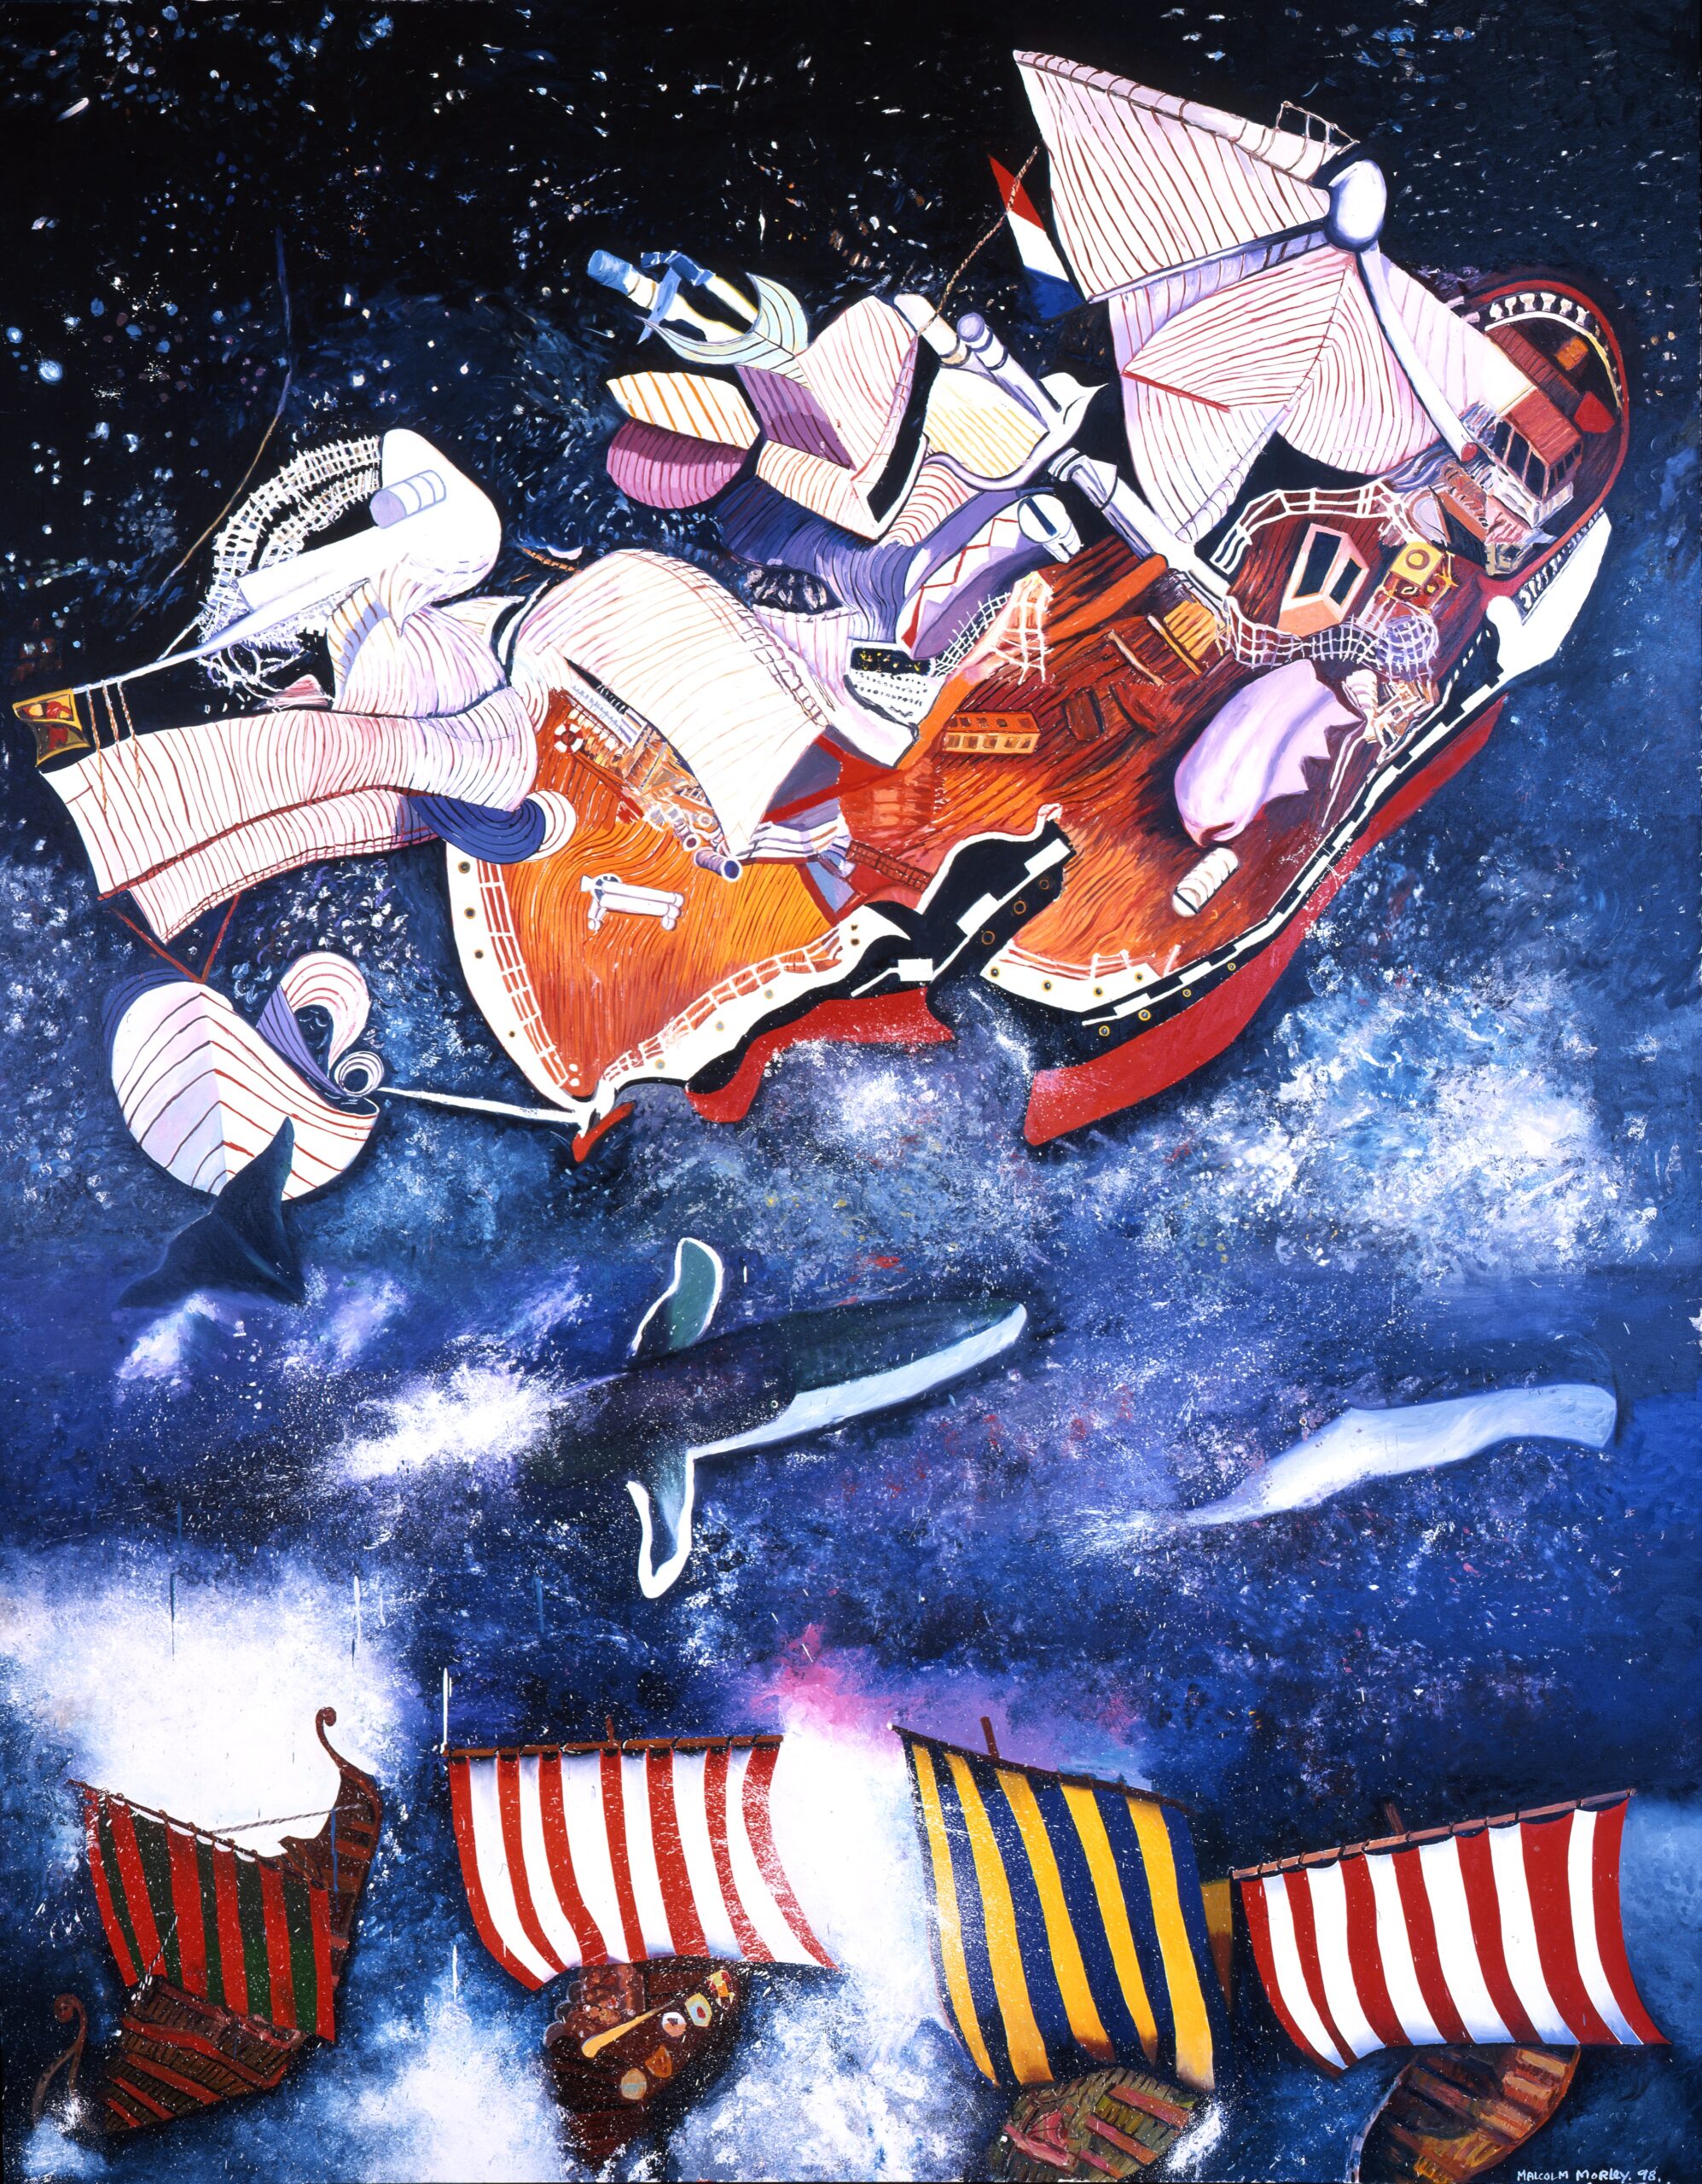 Malcolm Morley, Floundering Vessel with Blue Whales and Viking Ships, 1998. Oil on linen, Museum Purchase